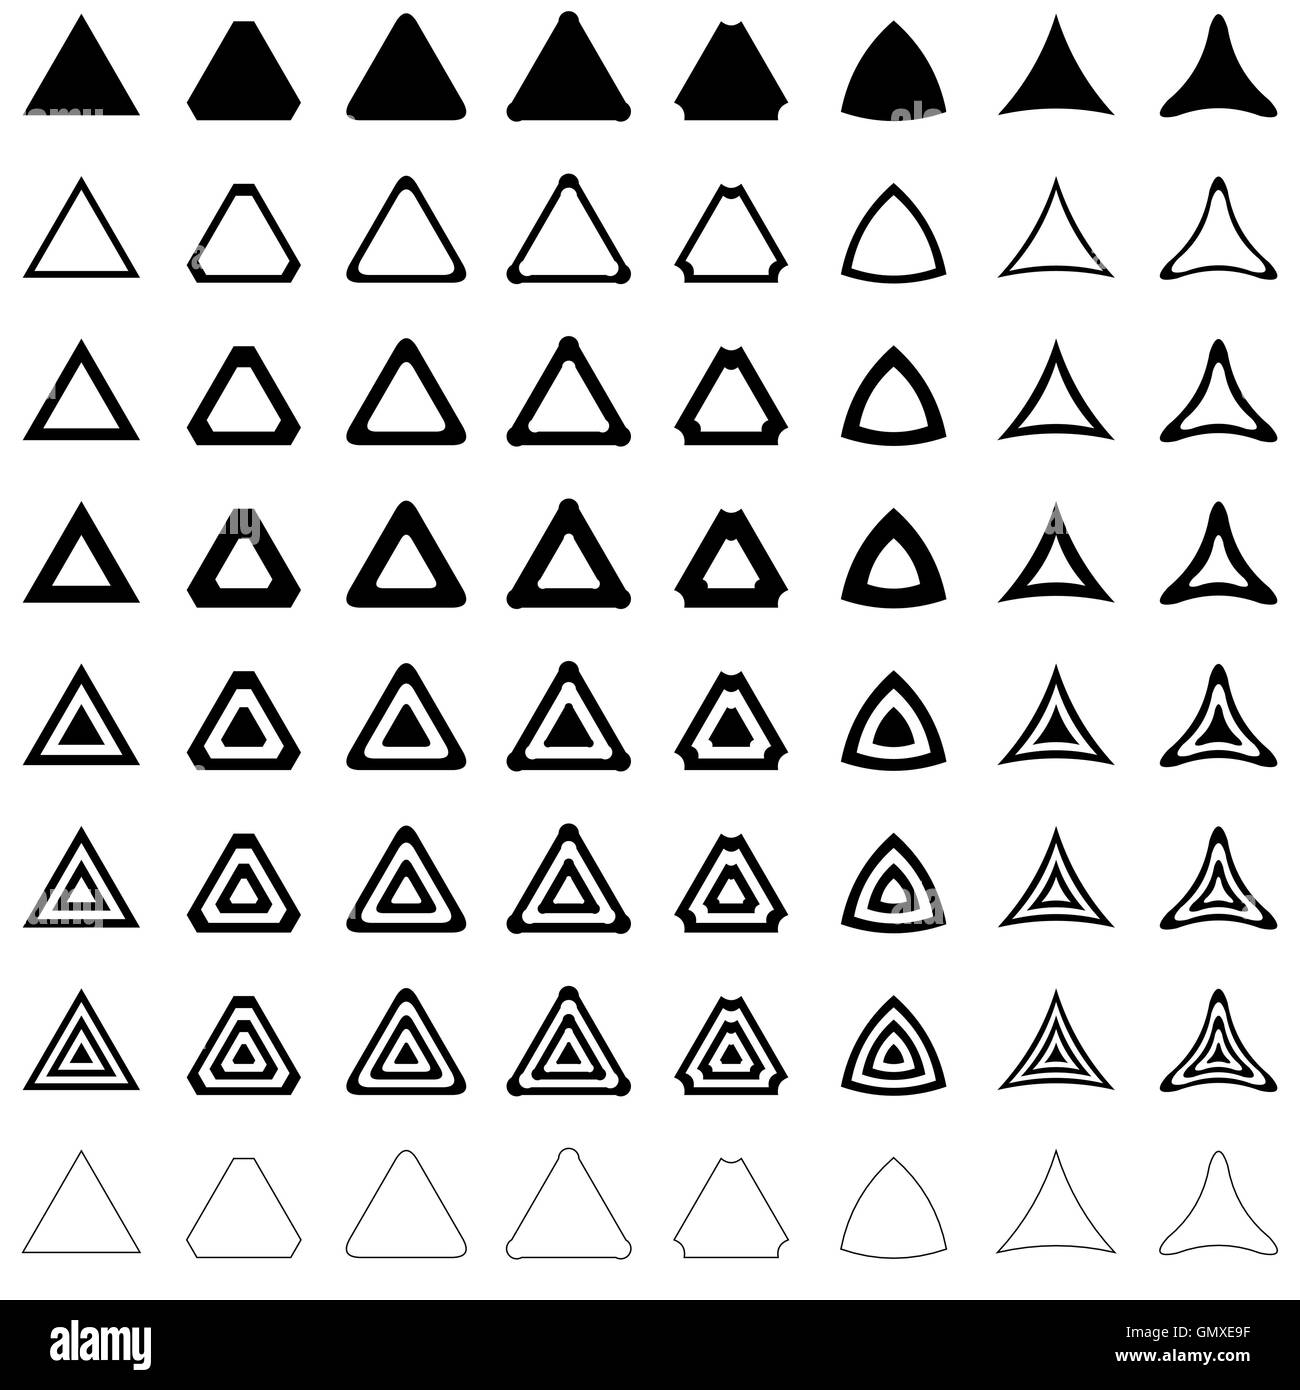 Curved triangles Black and White Stock Photos & Images - Alamy